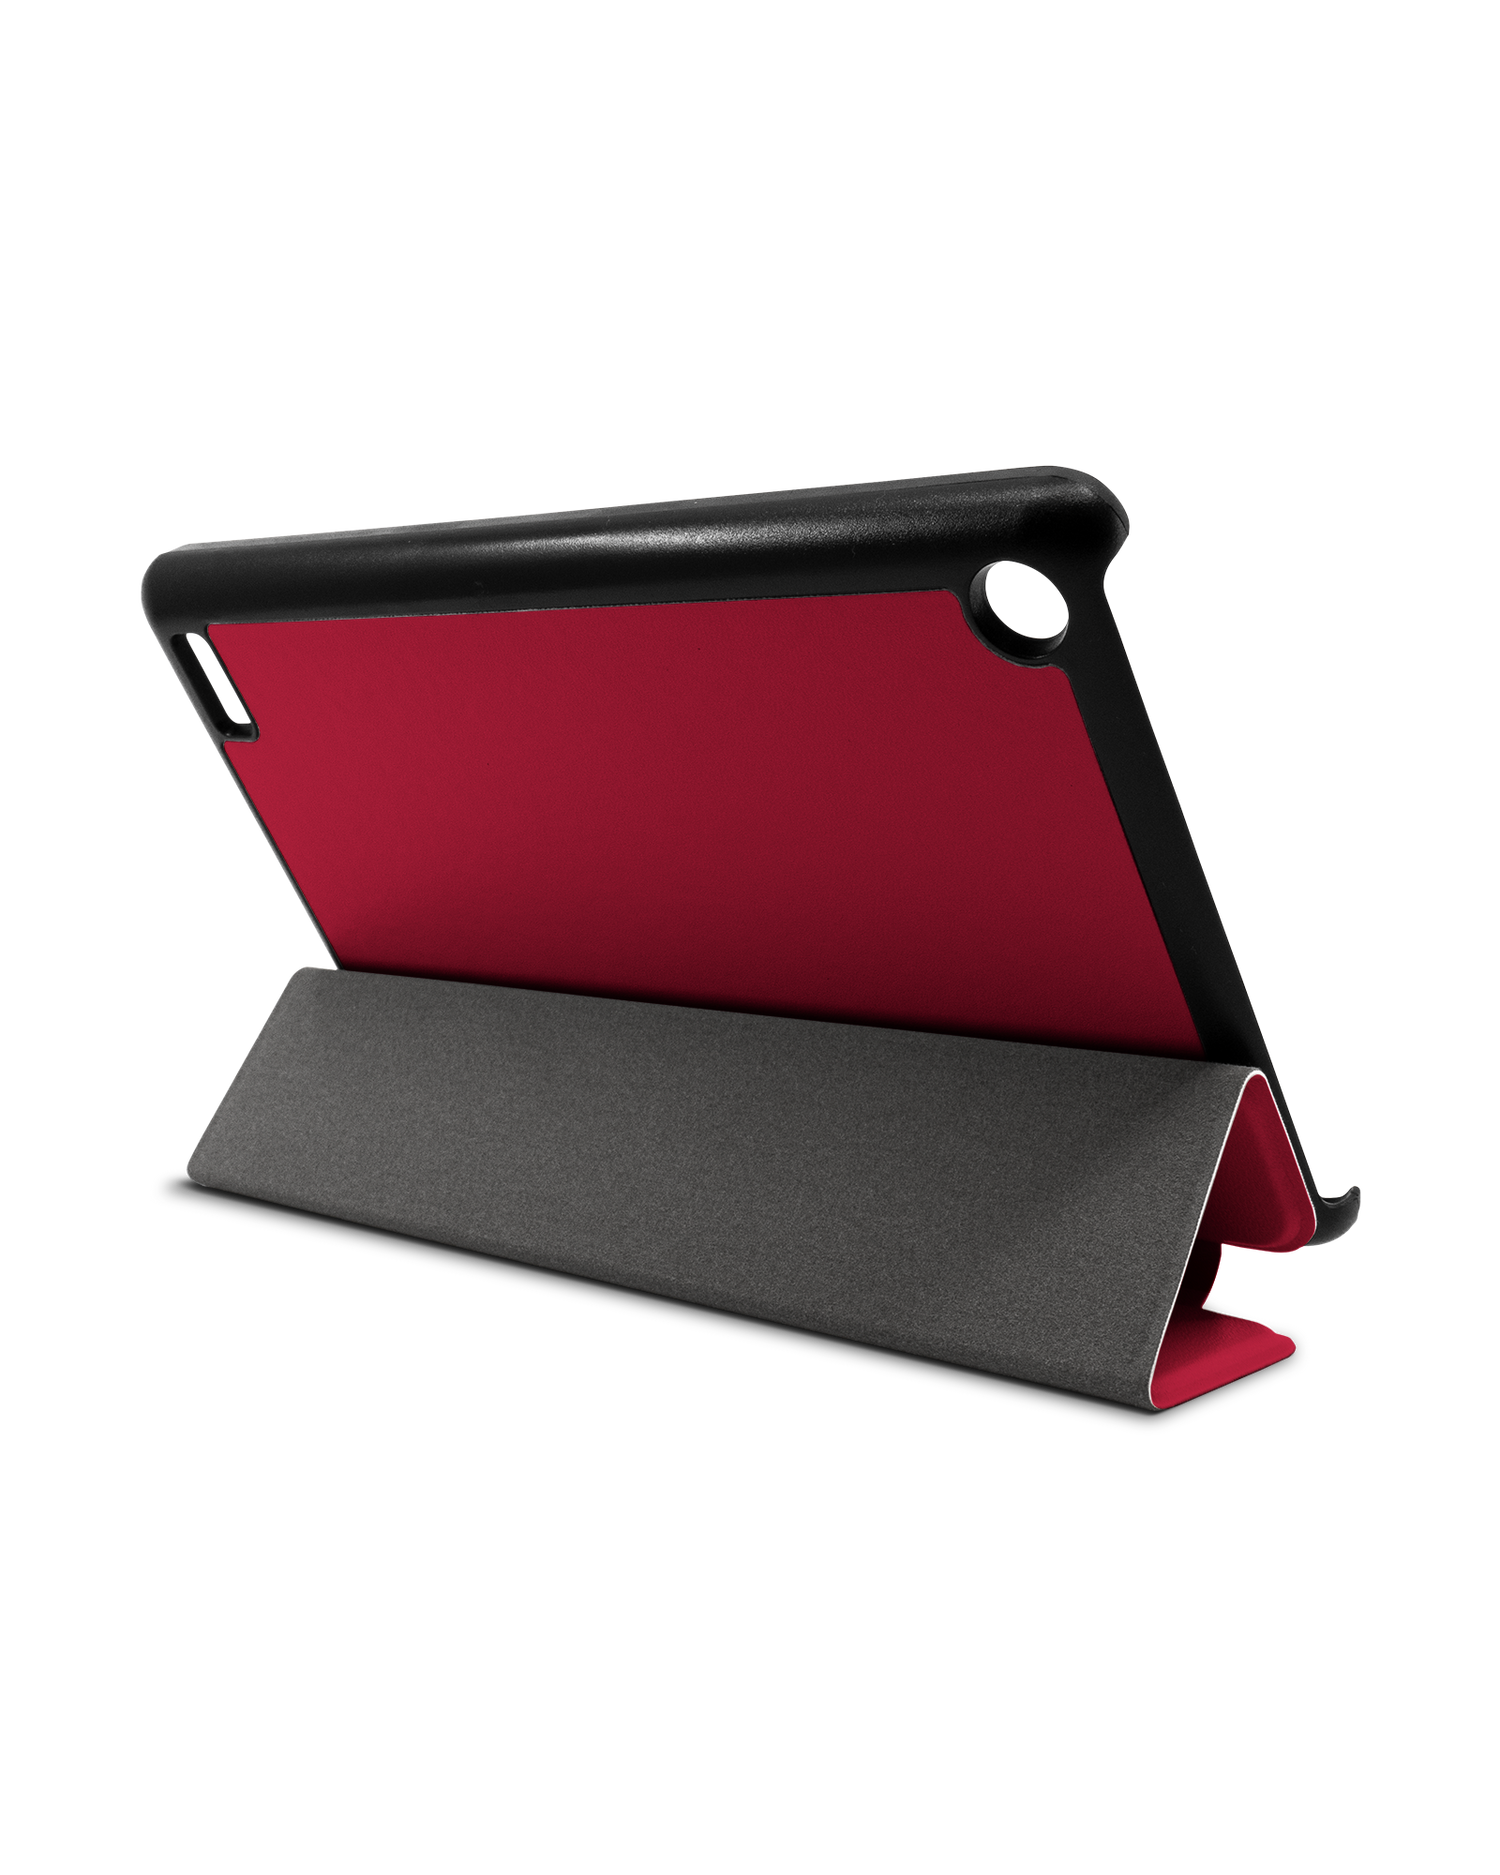 RED Tablet Smart Case for Amazon Fire 7: Used as Stand